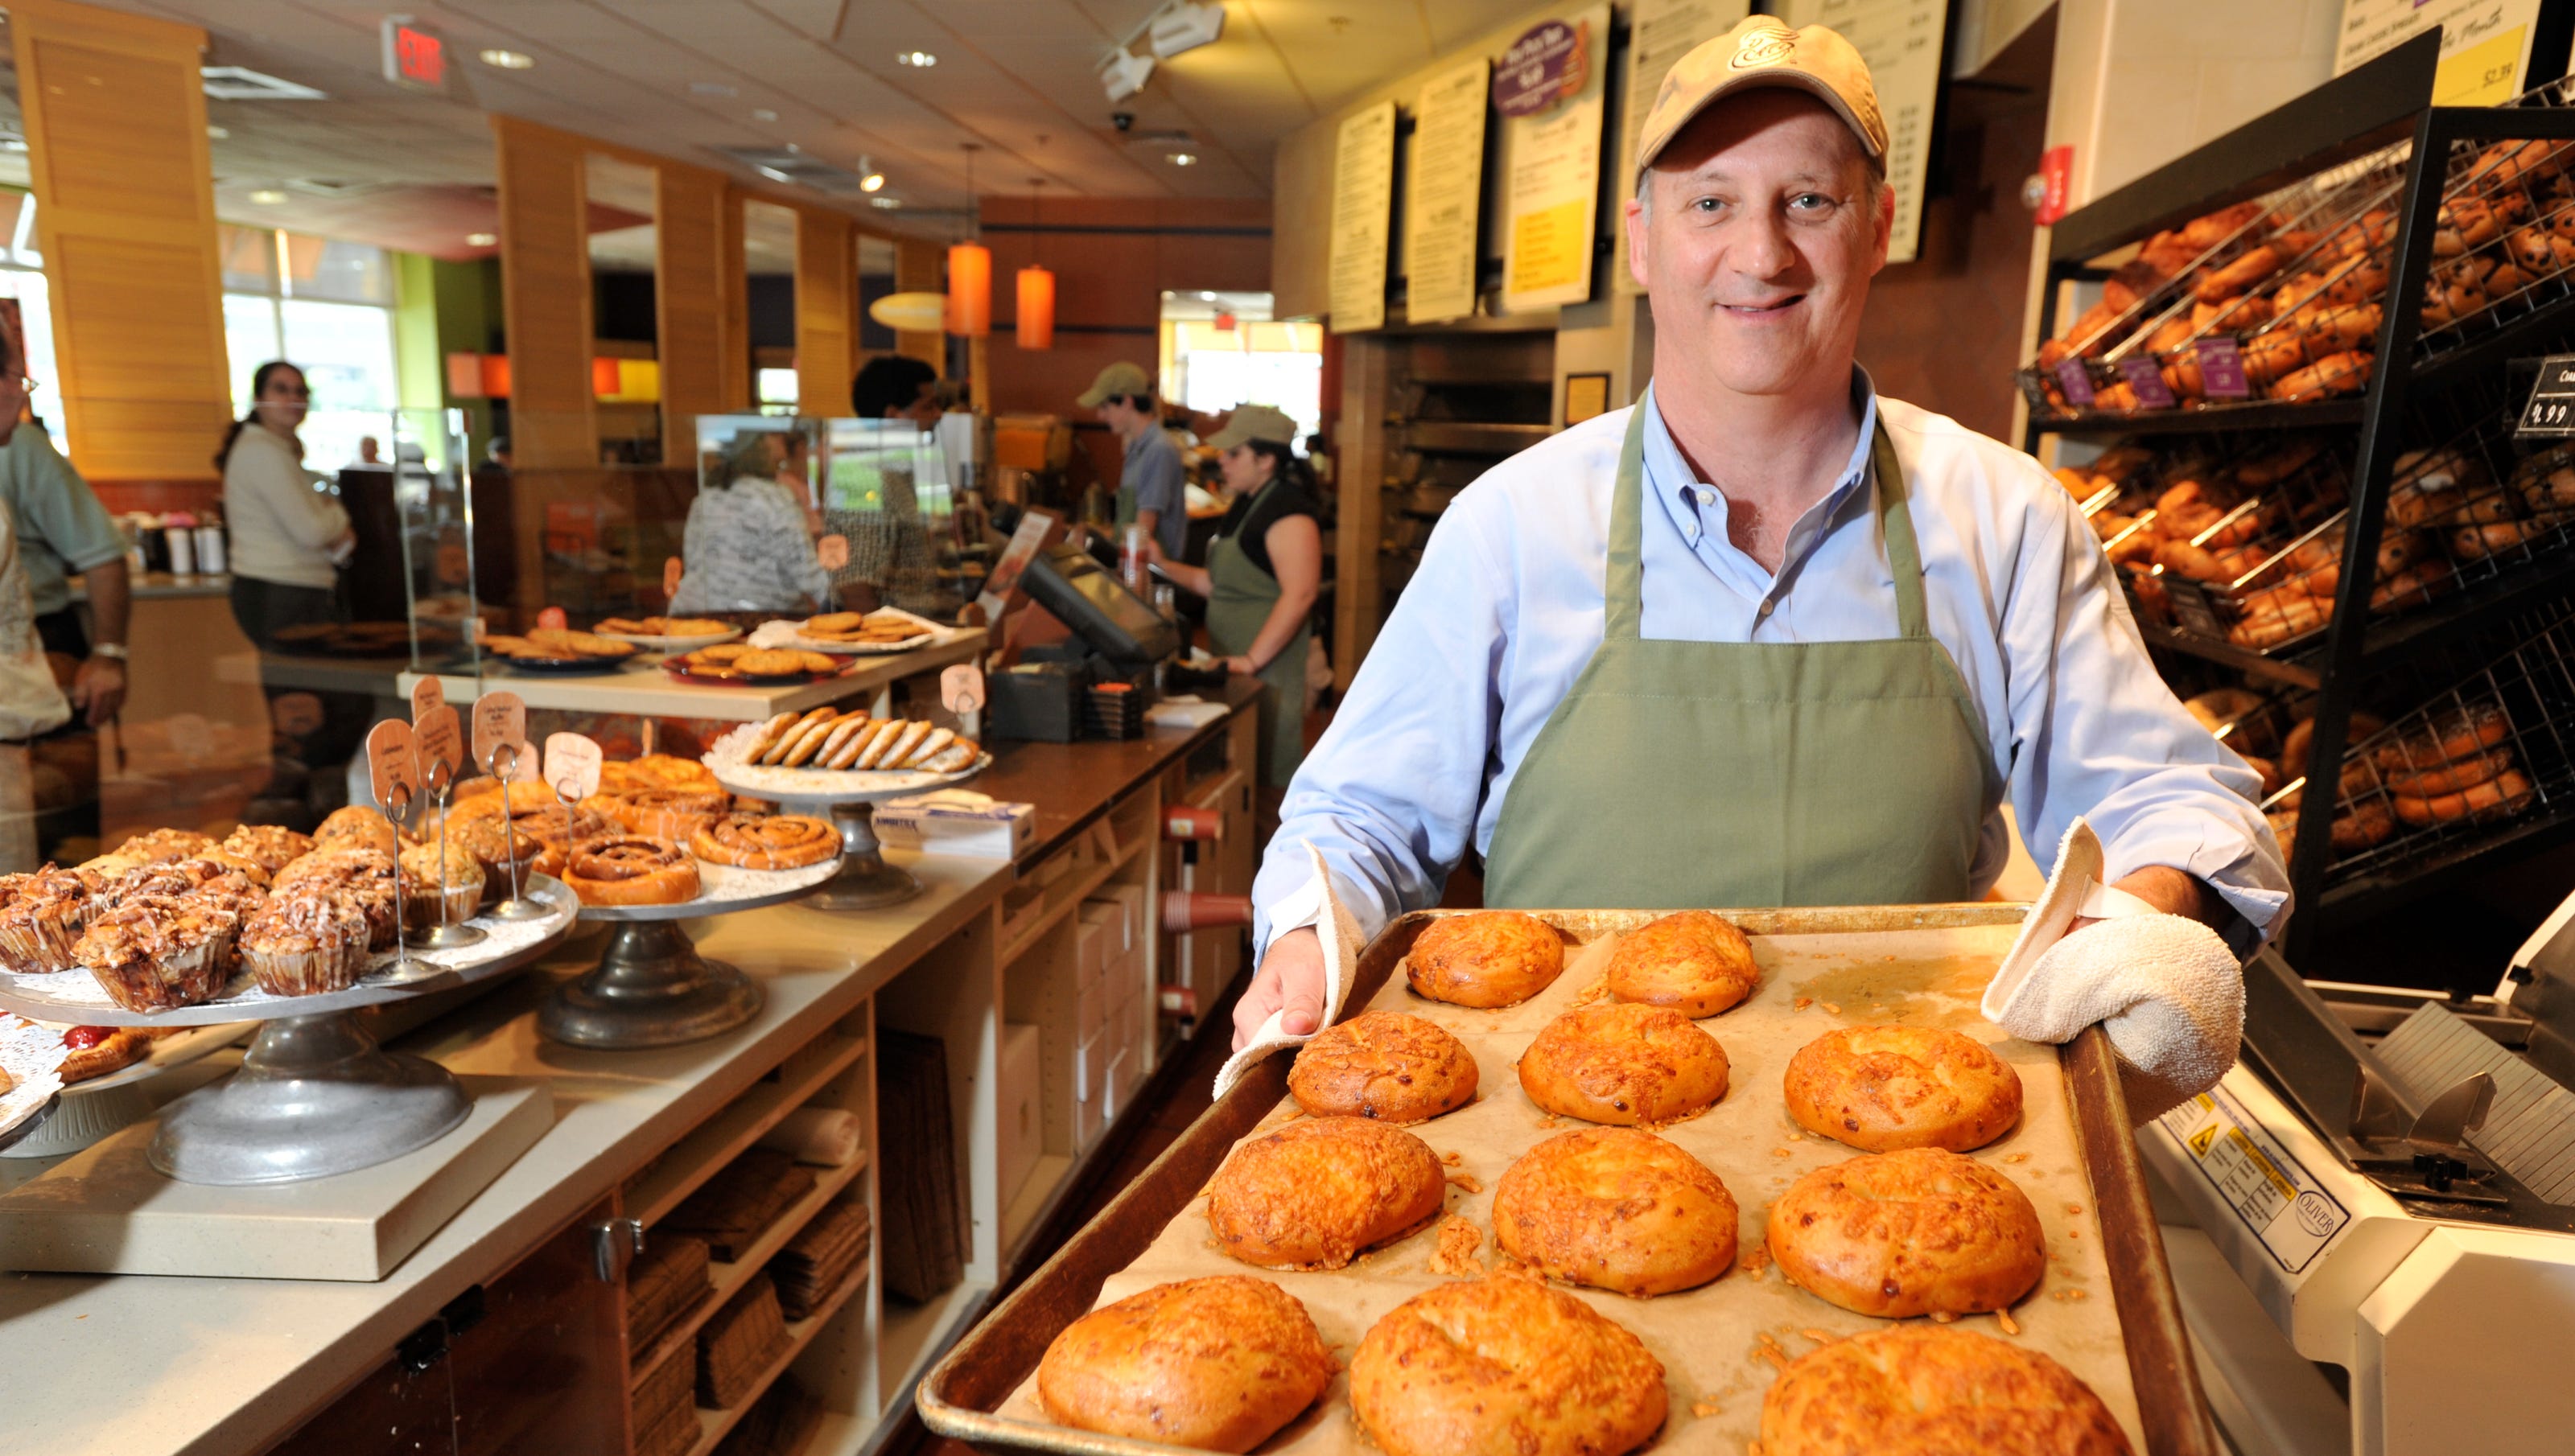 Panera CEO eating on $4.50 a day